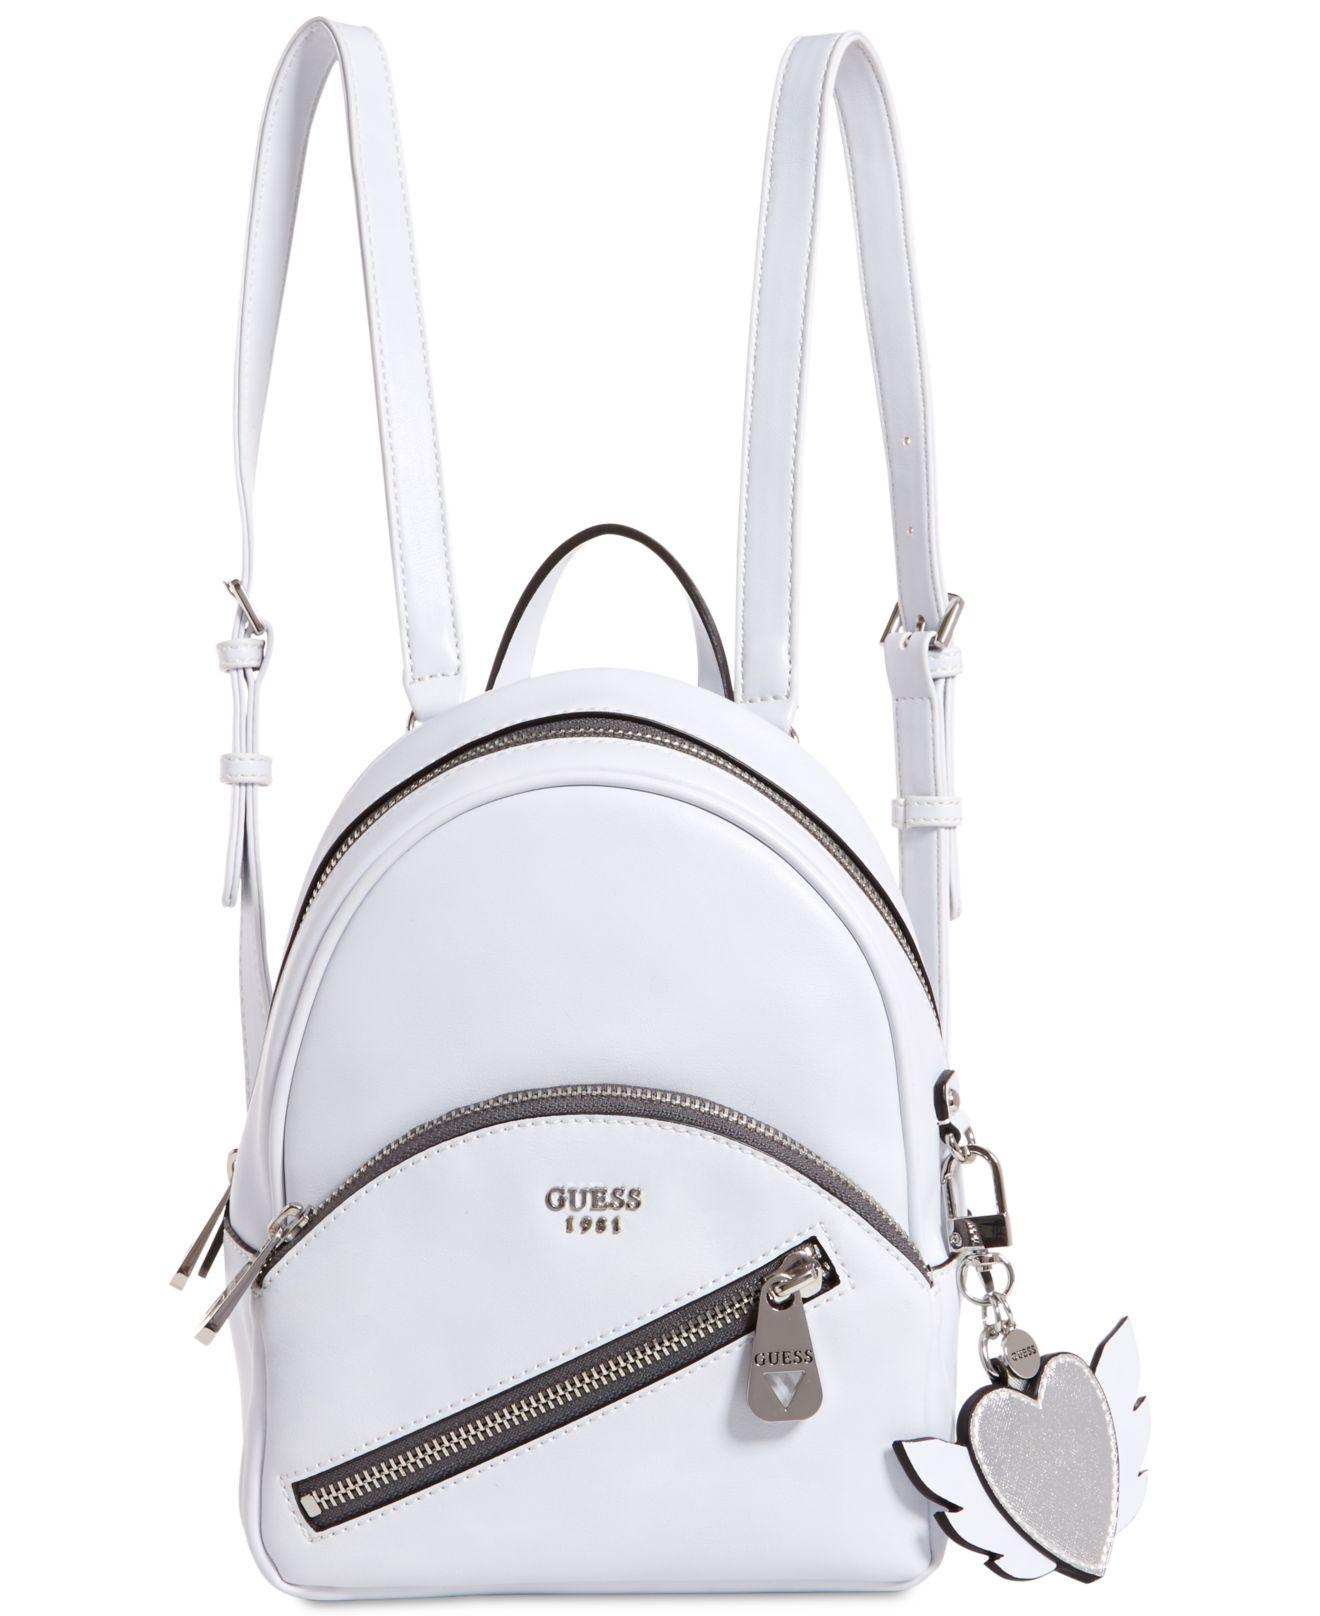 Guess Vision Mini Backpack | IMT Mines Albi